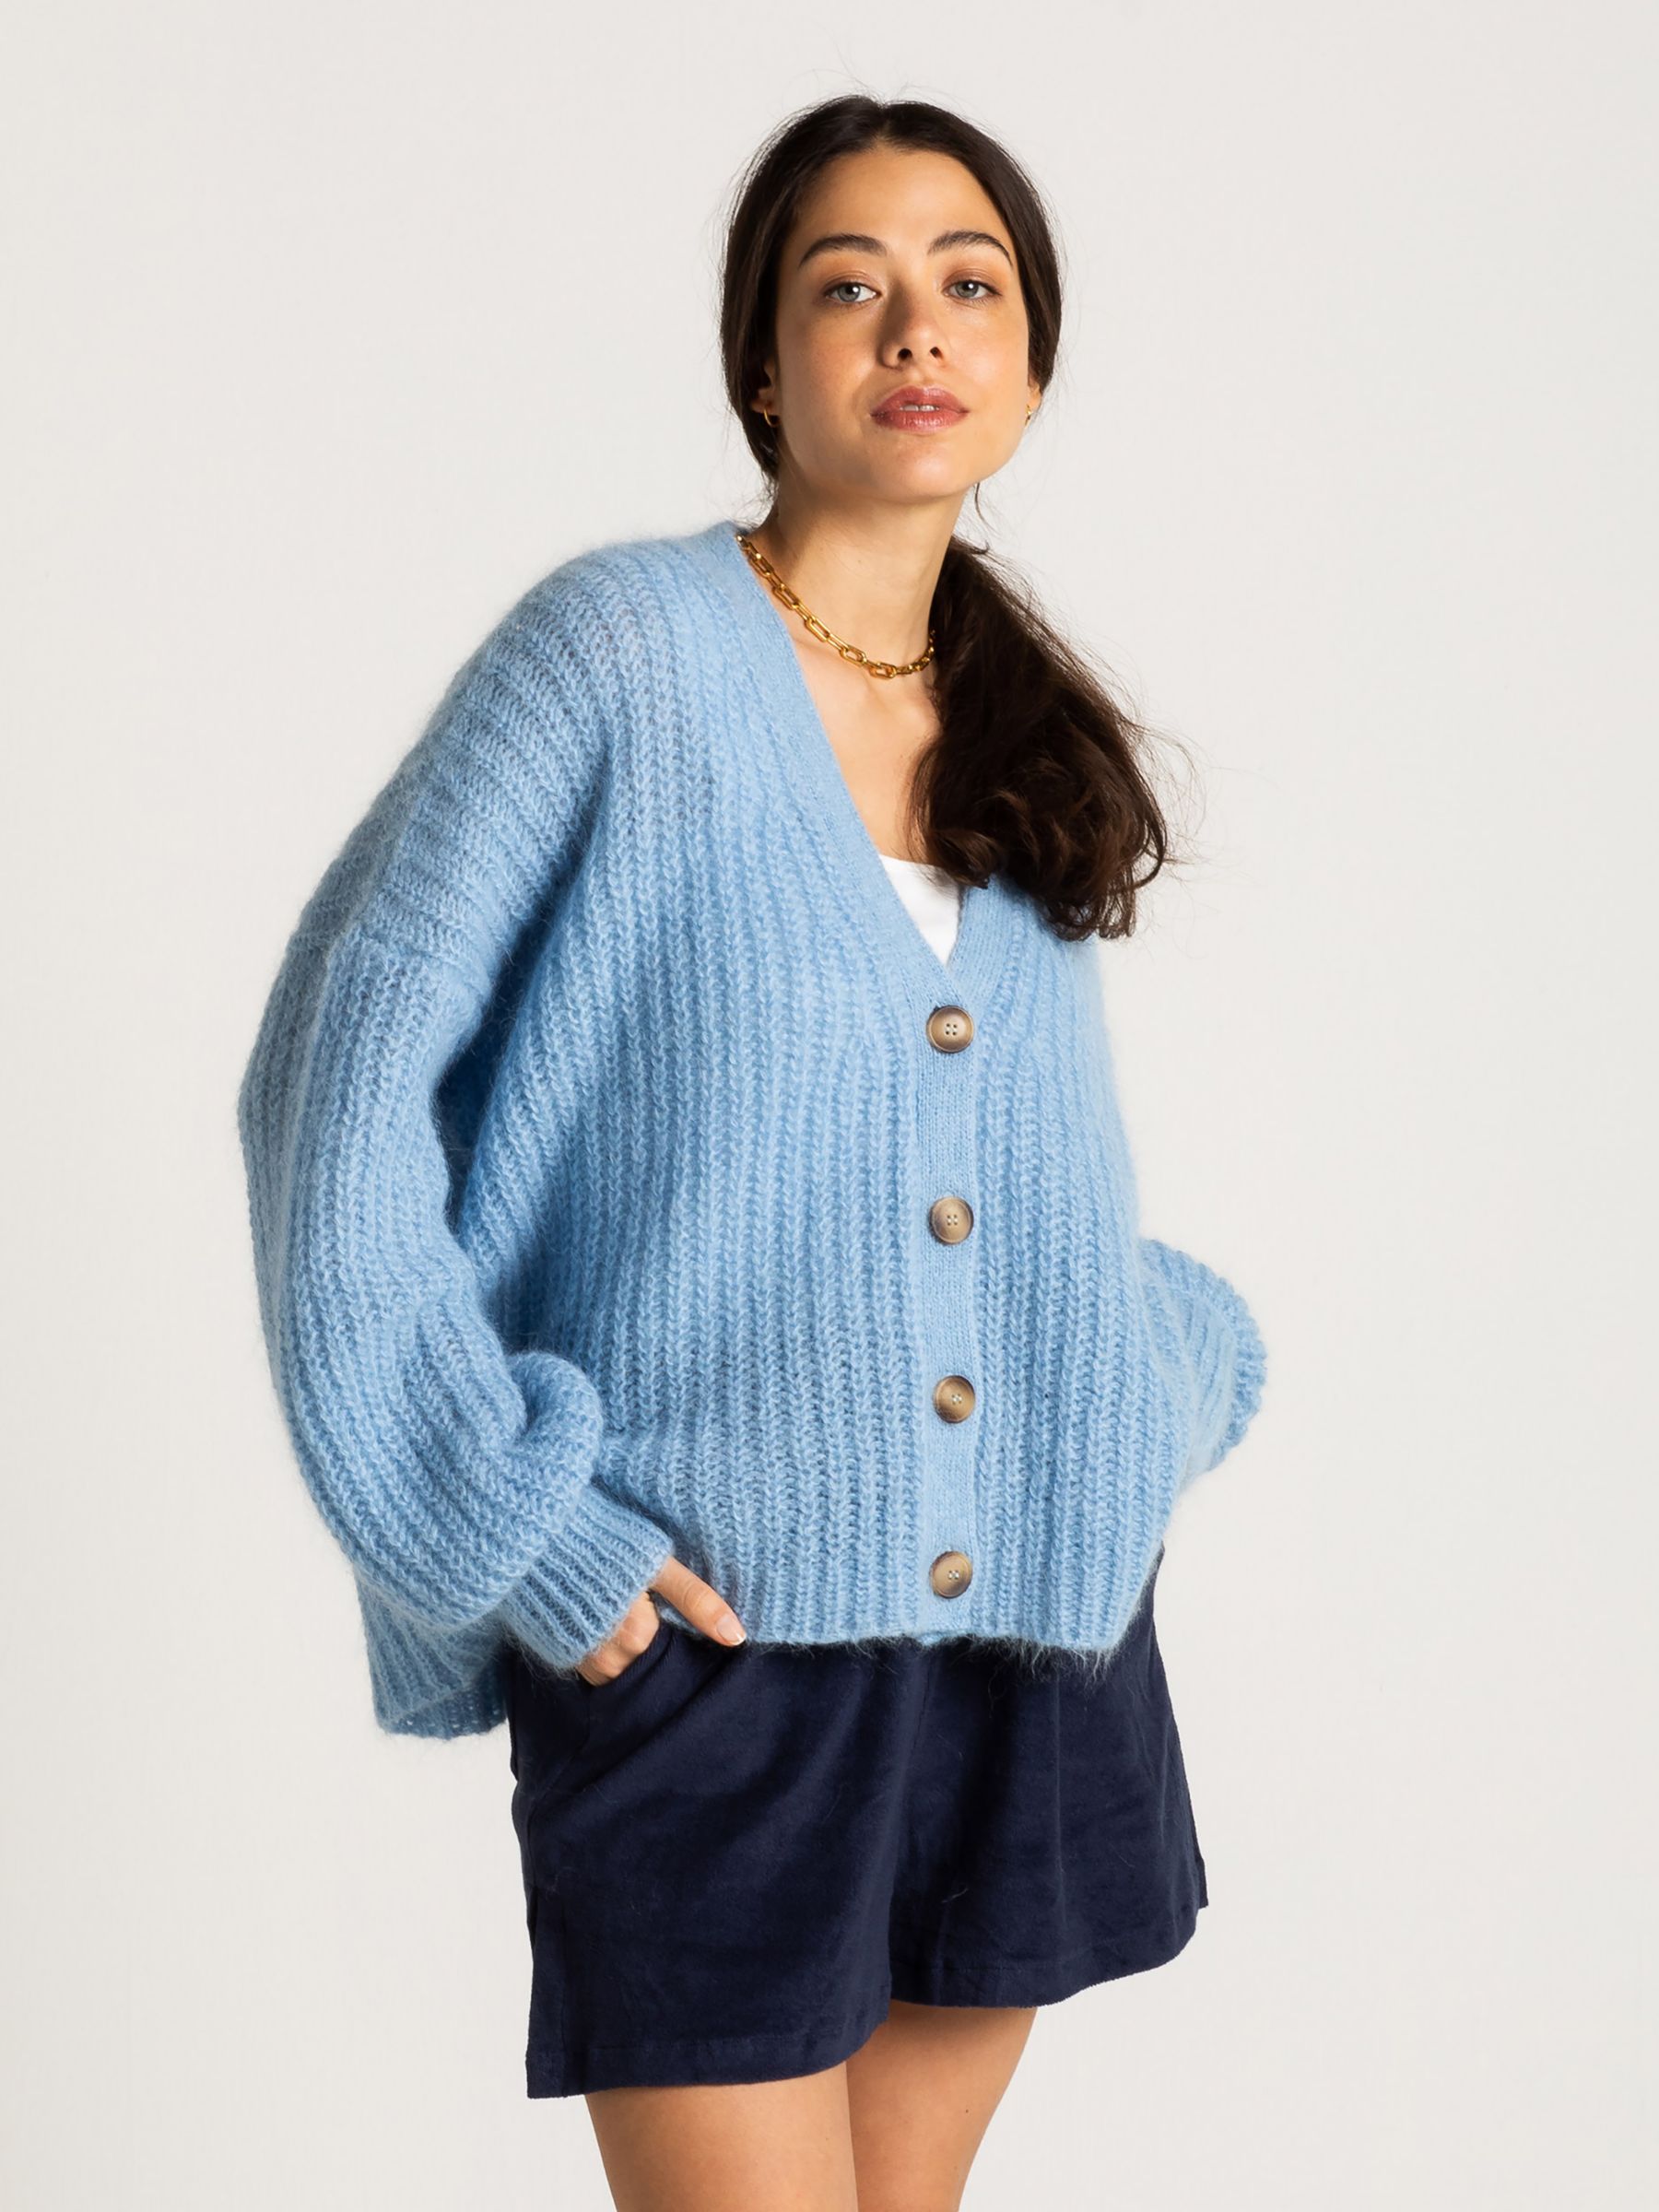 Cape Cove Sirena V-Neck Button Cardigan, Ice Blue at John Lewis & Partners